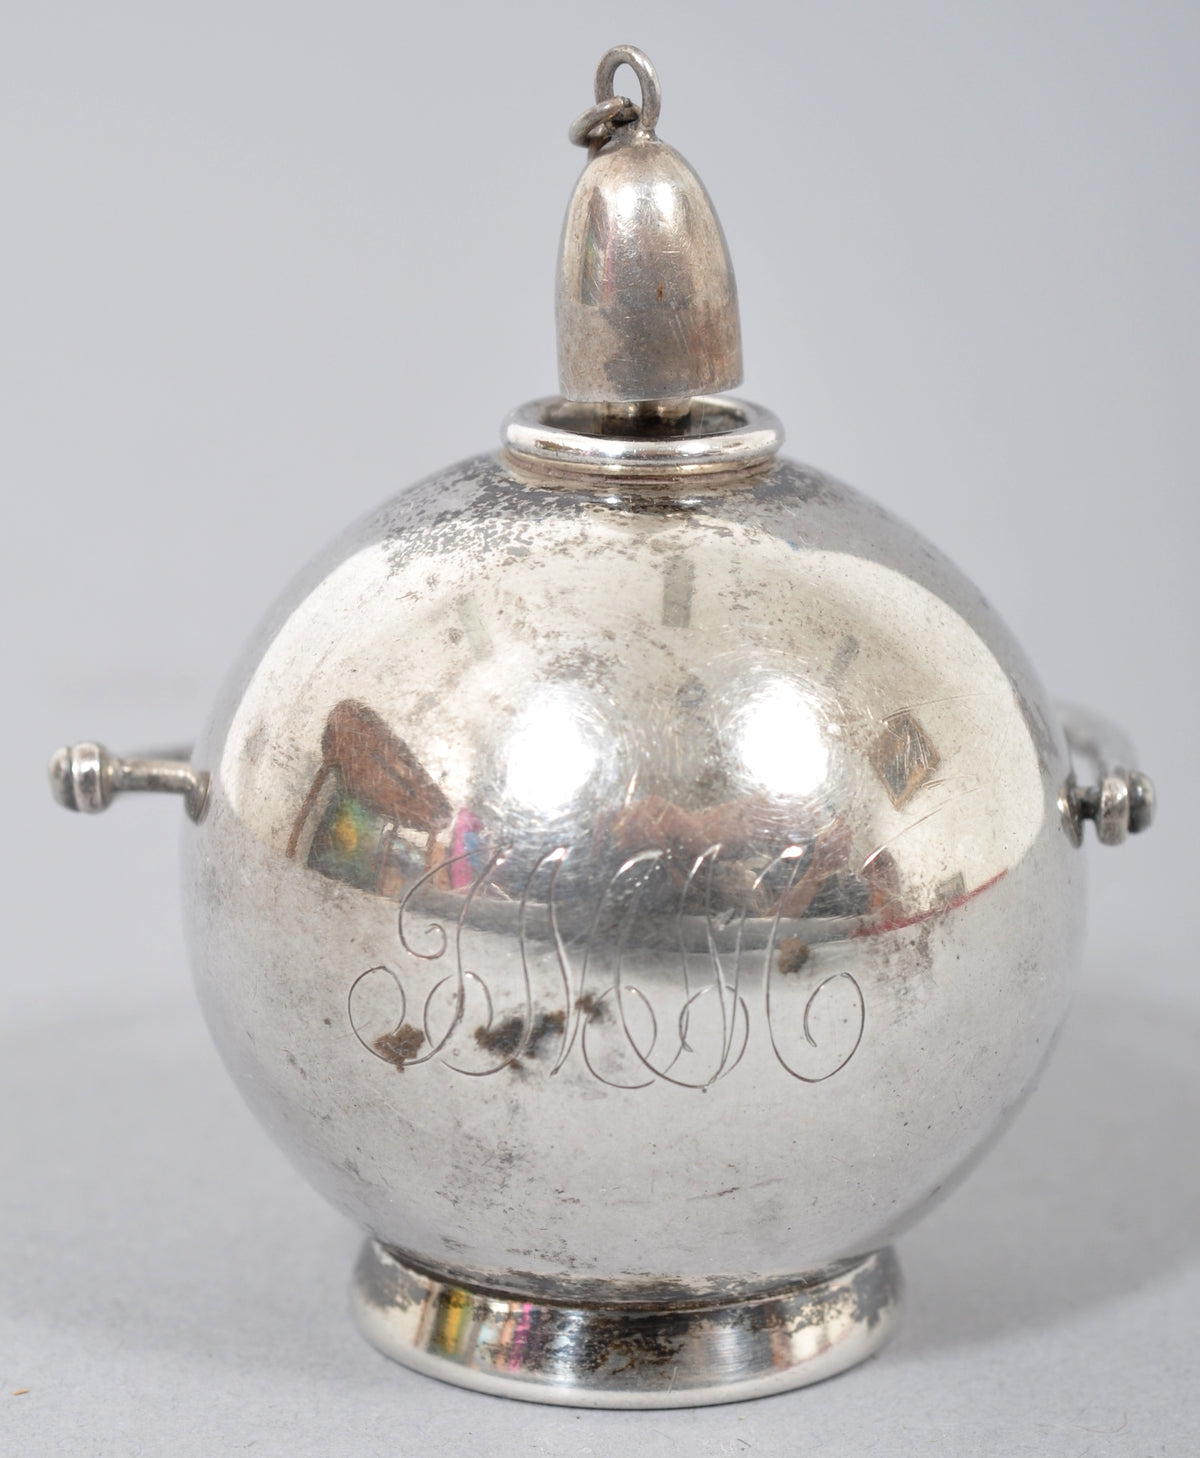 Antique Victorian American Sterling Silver and Ivory Table Cigar Lighter by Frank M. Whiting Company, Circa 1890